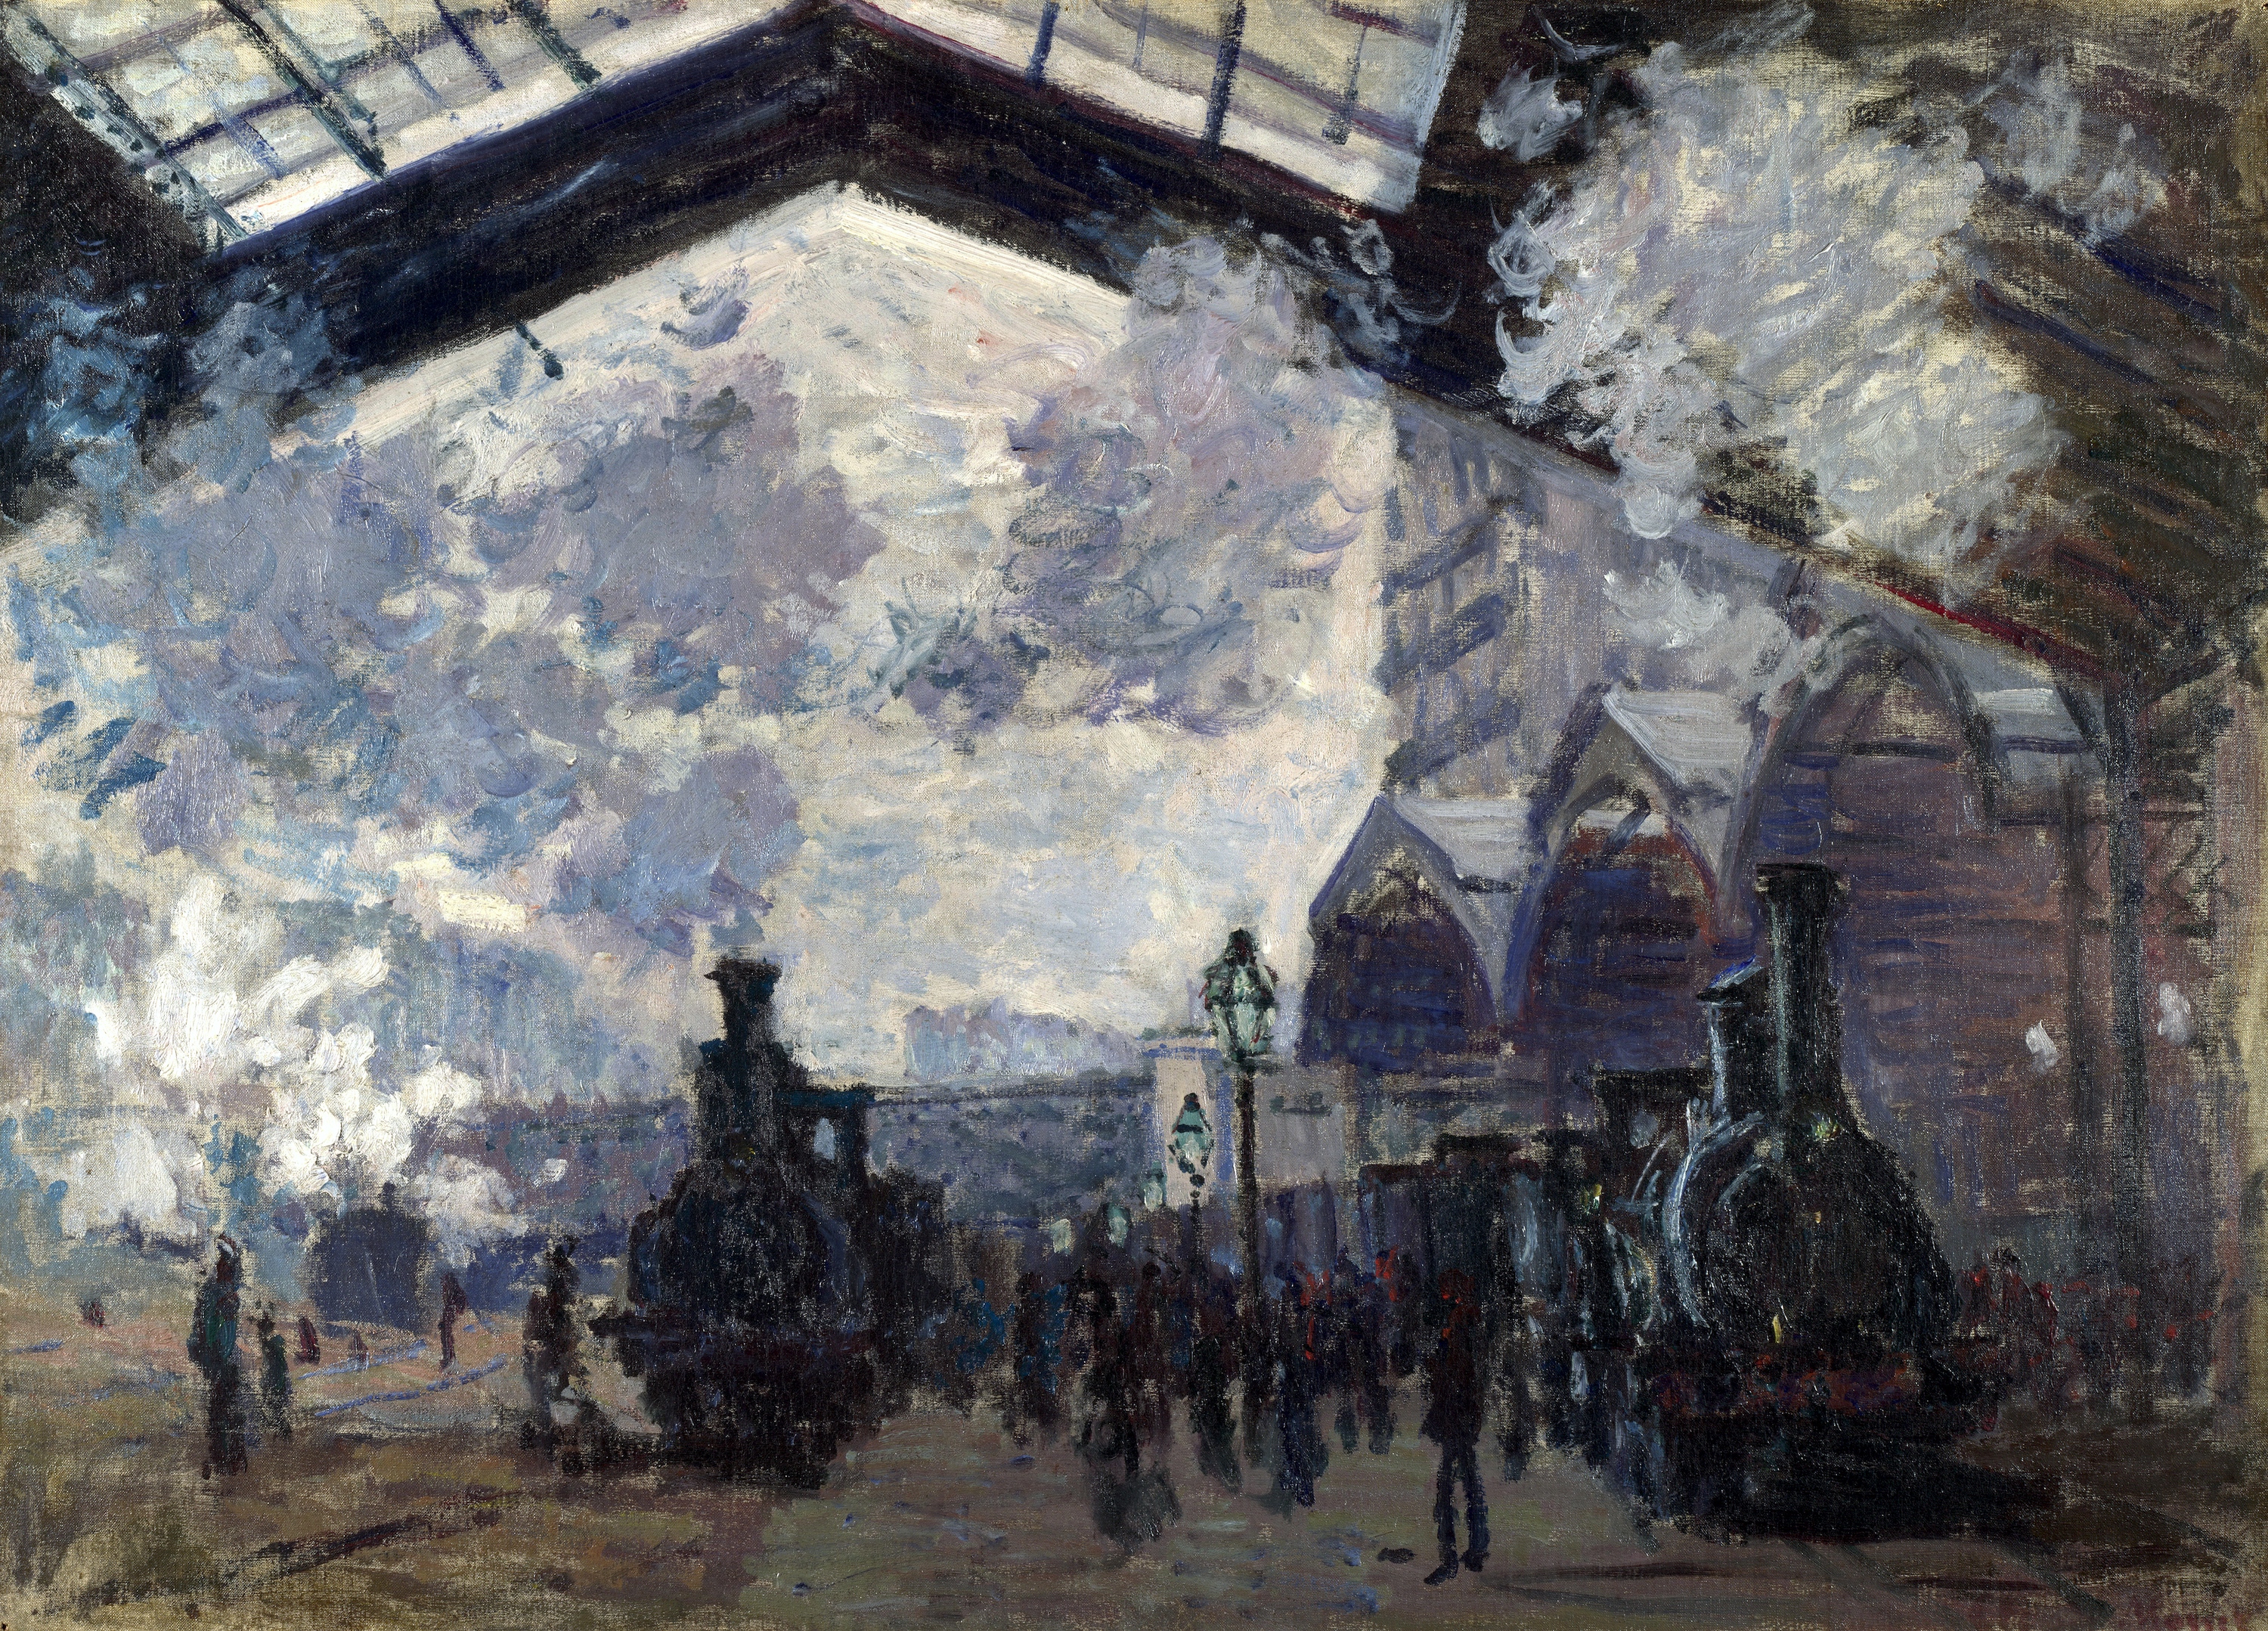 The Gare St-Lazare by Claude Monet - 1877 - 54.3 x 73.6 cm National Gallery